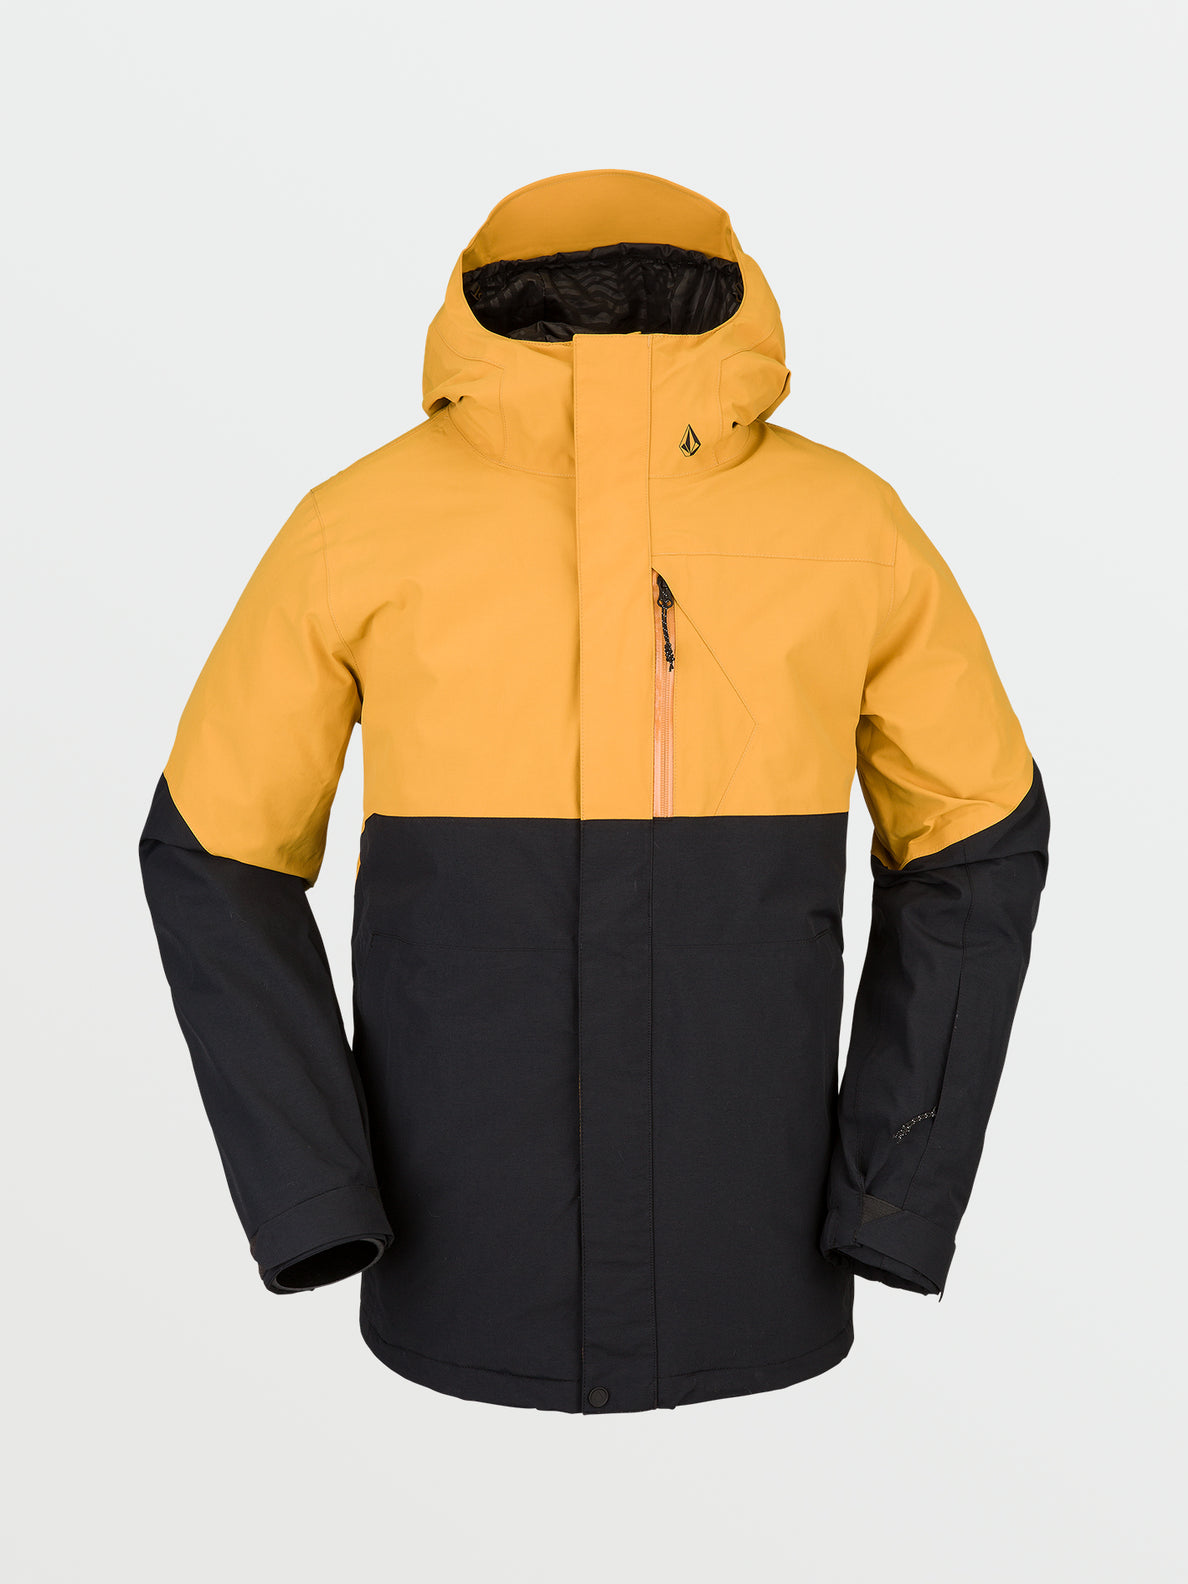 L Insulated Gore-Tex Jacket - RESIN GOLD (G0452211_RSG) [F]